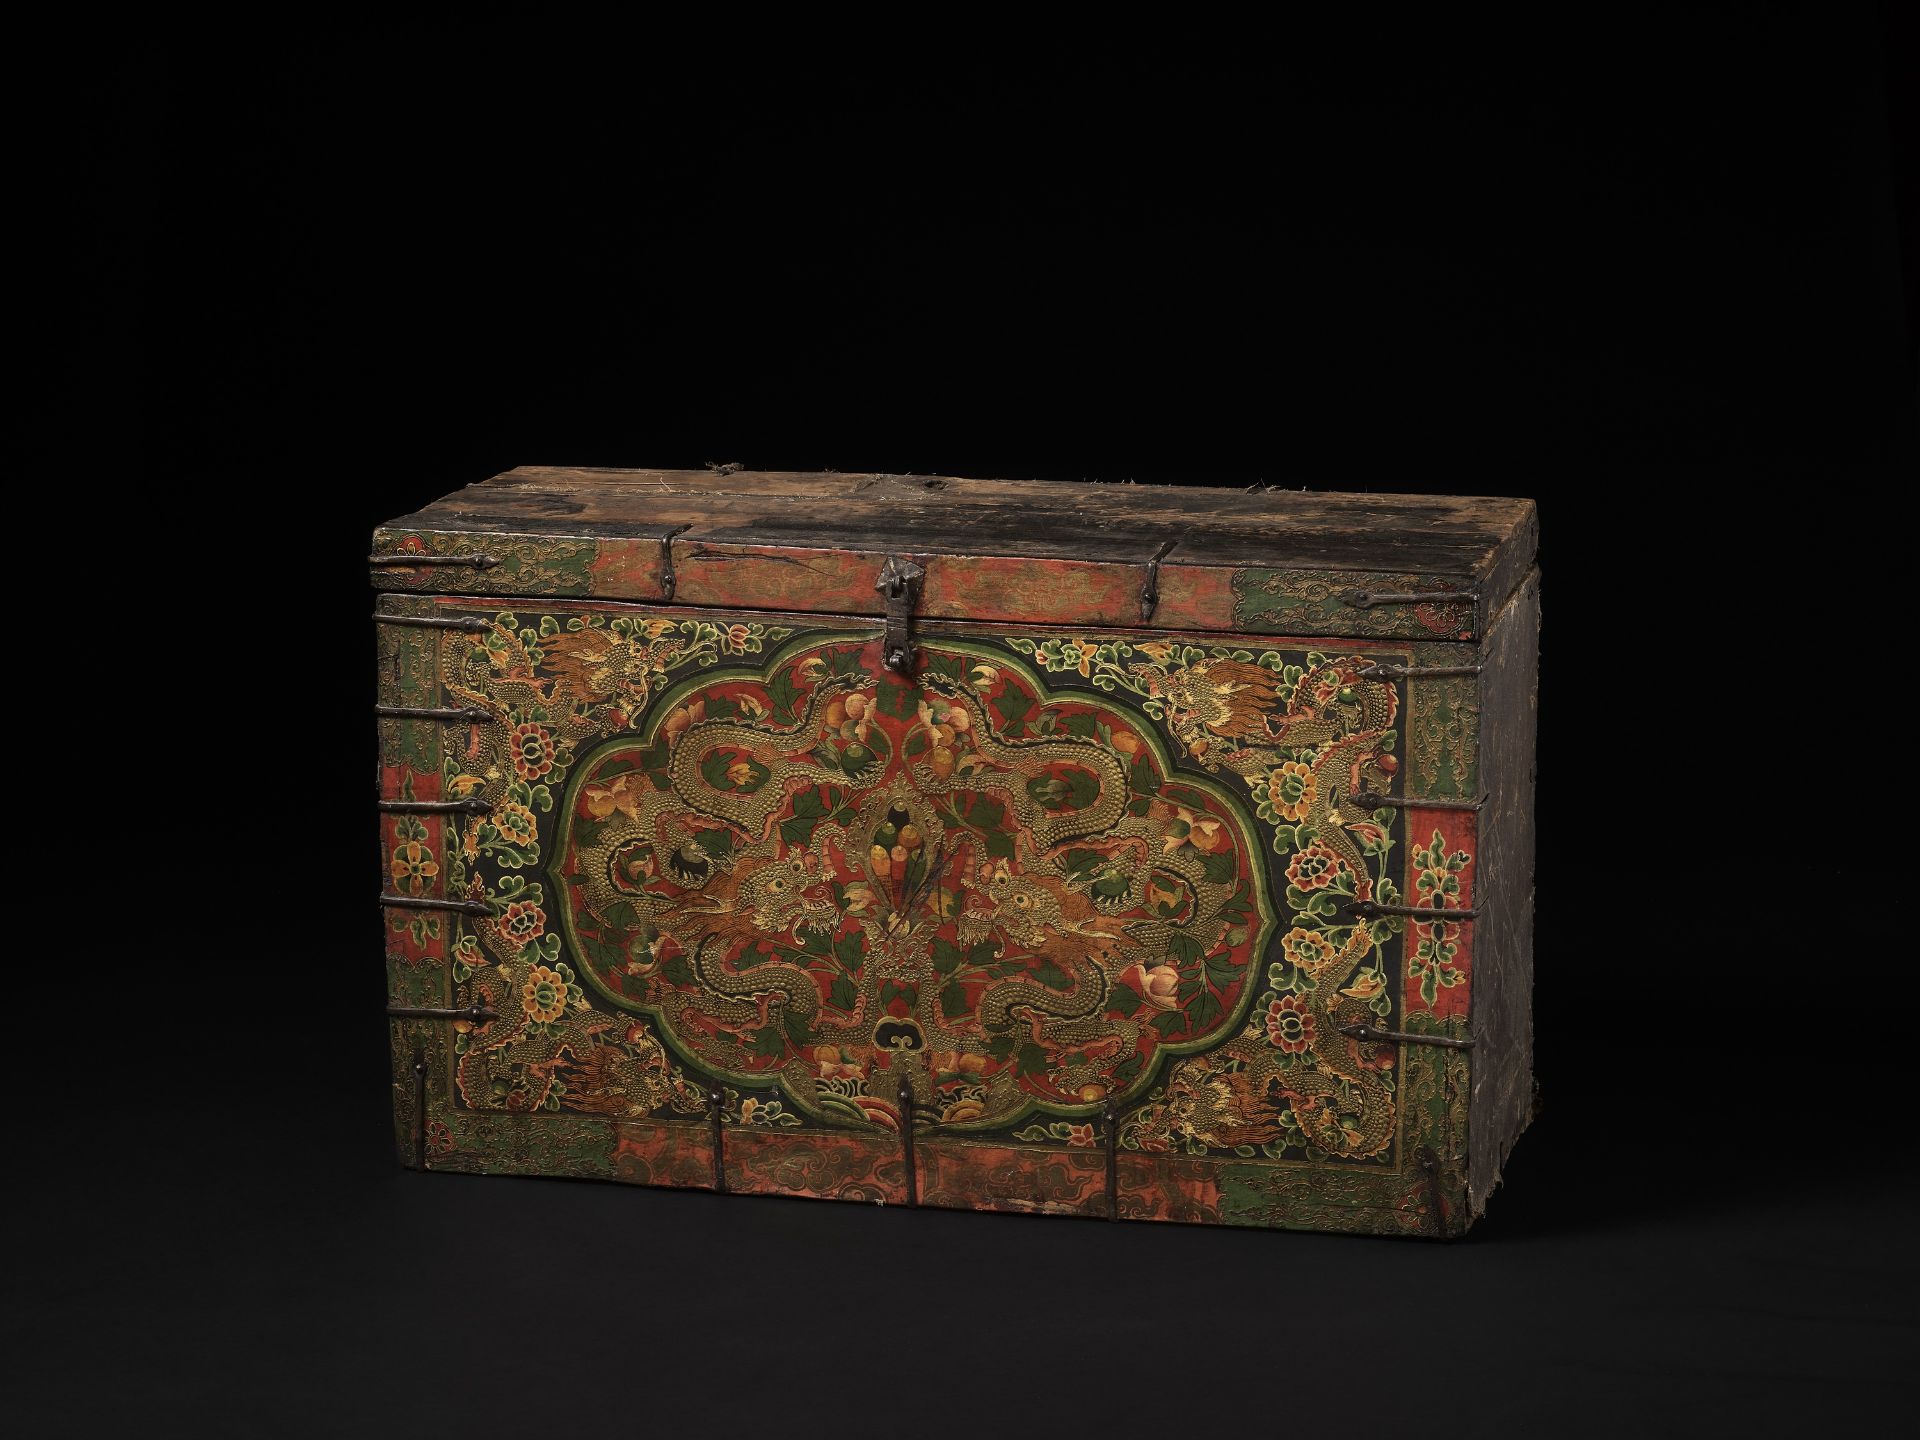 A LARGE PAINTED WOOD 'DRAGON' STORAGE CHEST, 19TH CENTURY - Image 2 of 6